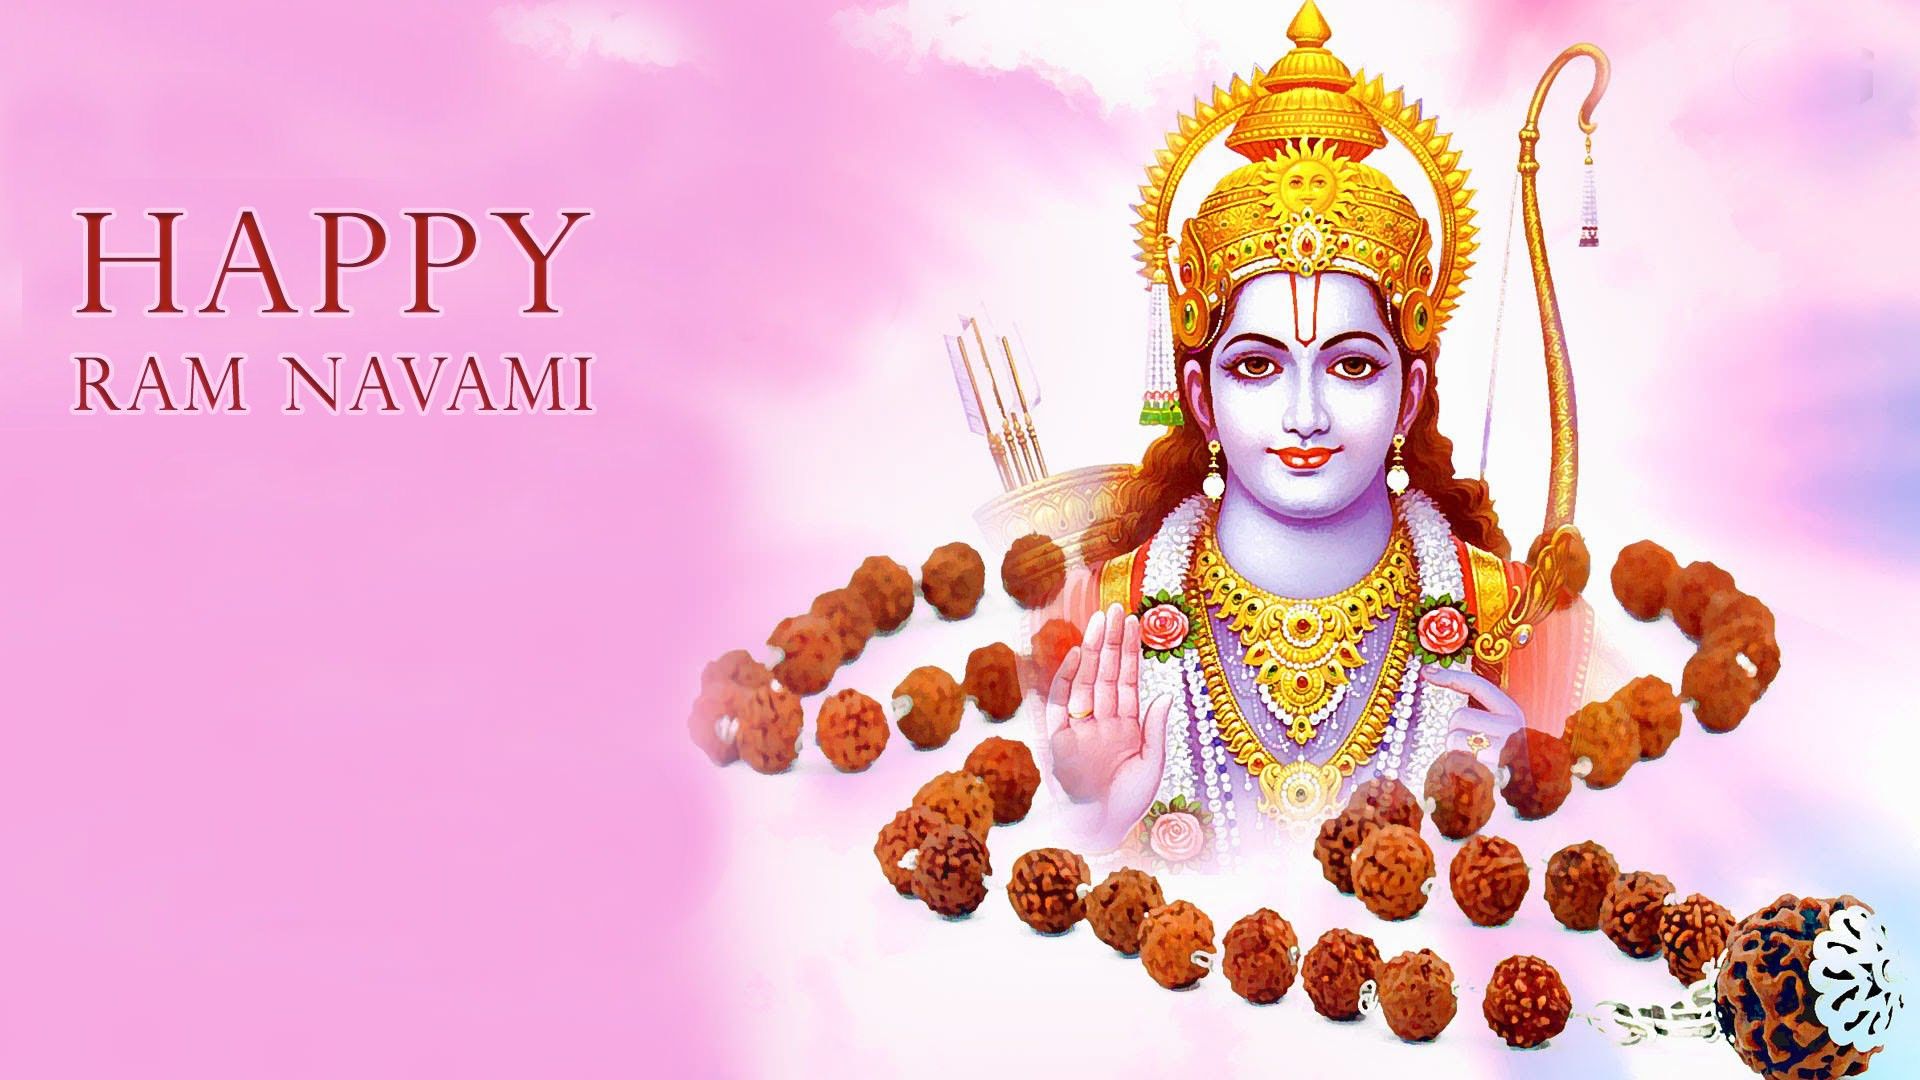 Happy Rama Navami 2020 HD Images  Wallpapers For Free Download Online  Celebrate Hindu Festival With Shri Ram HD Photos WhatsApp Stickers and GIF  Greetings   LatestLY